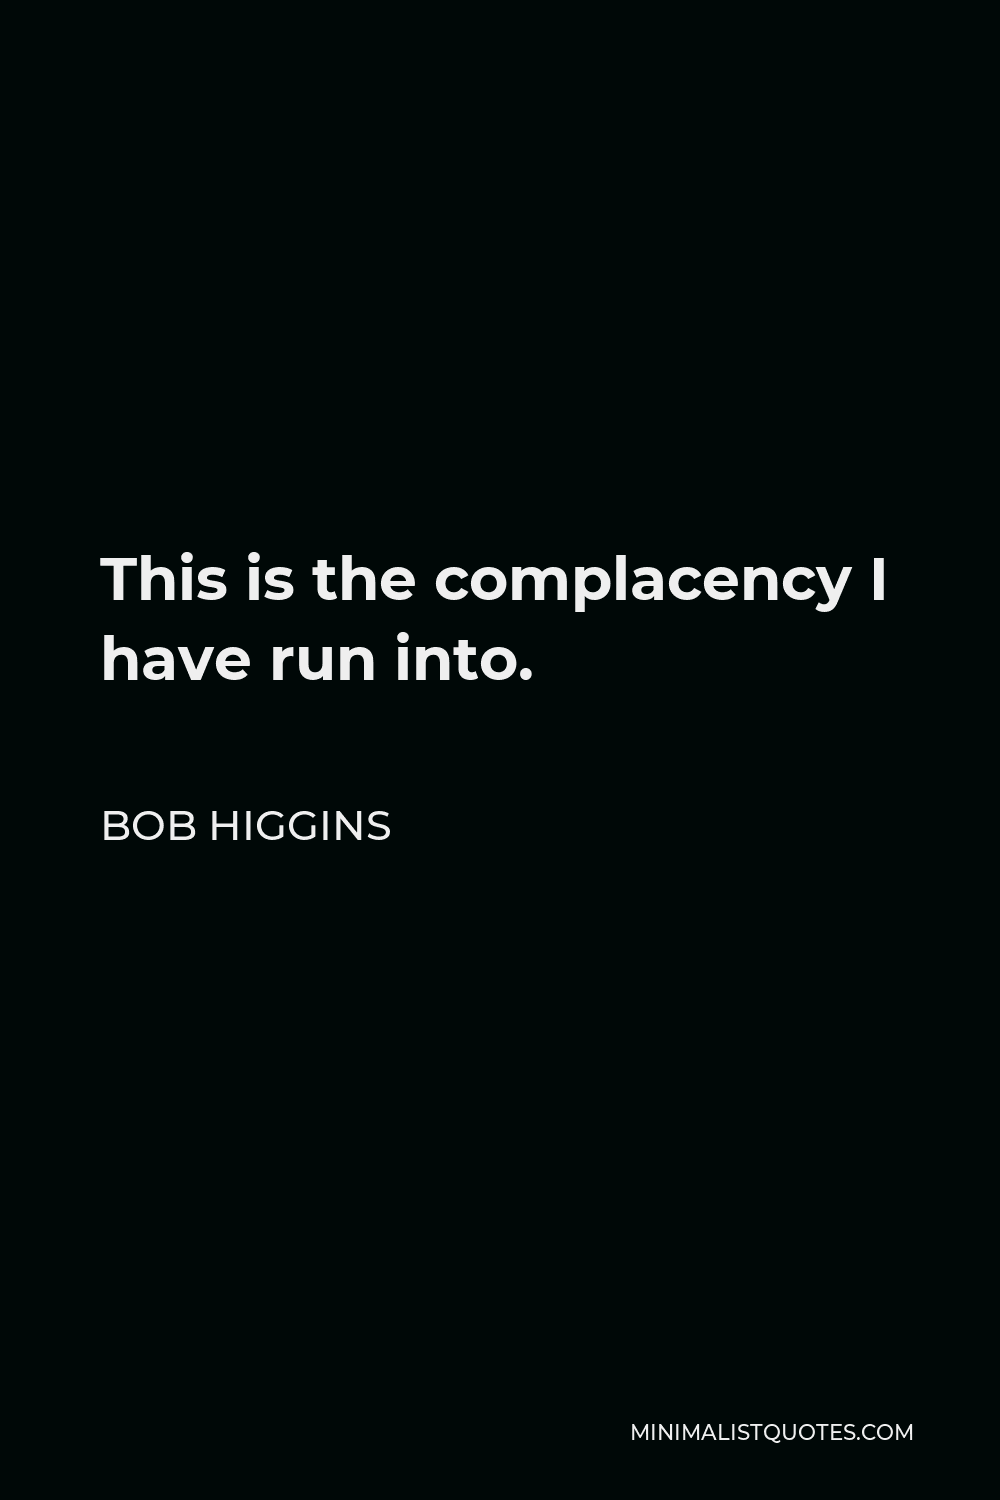 Bob Higgins Quote - This is the complacency I have run into.